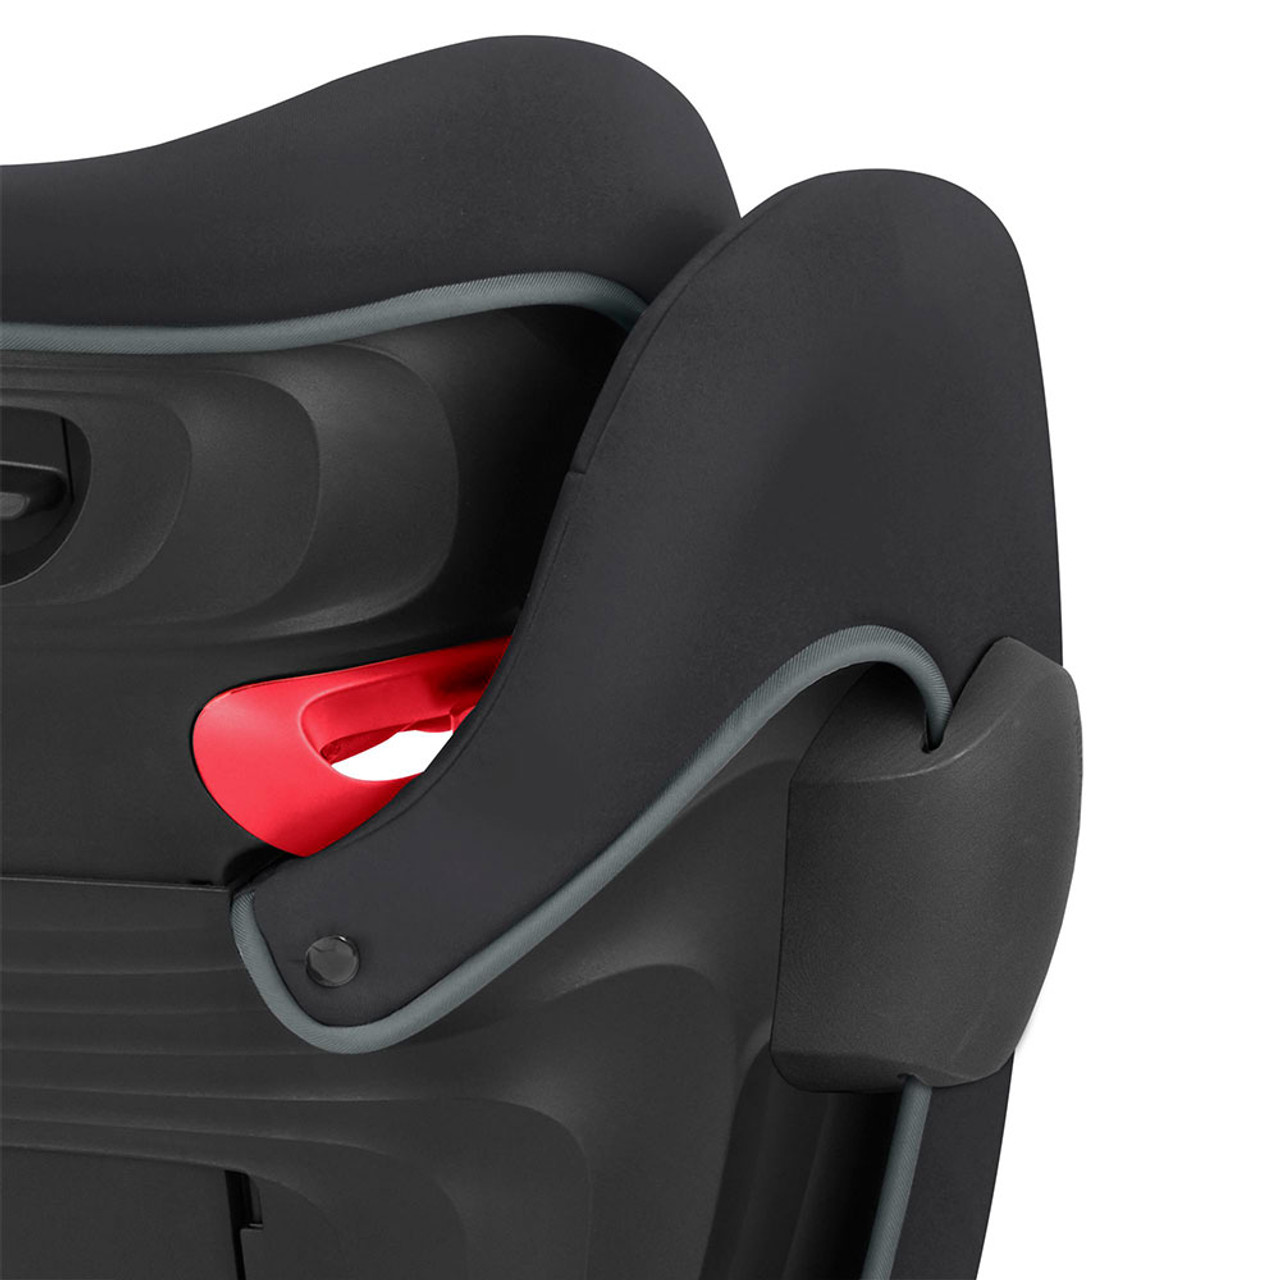 CYBEX B-Fix High Back Booster Seat - Lightweight, Latch Installation,  Linear Side Impact Protection, Adjustable Headrest - For Kids 40-120 lbs